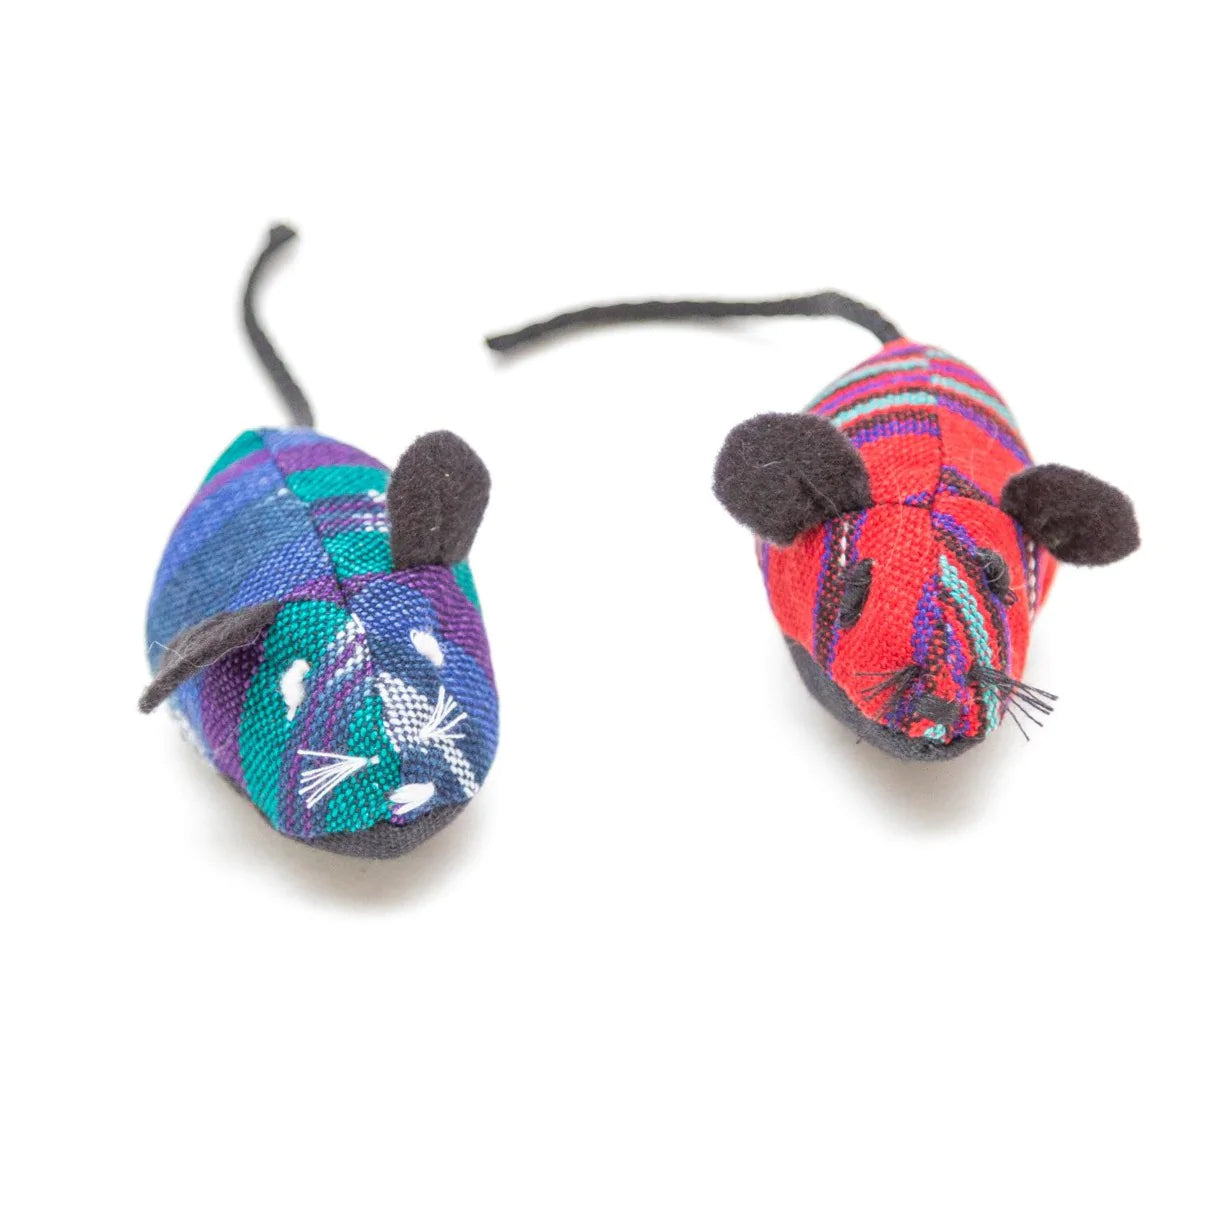 Our Fair Trade and Handmade version of Tom and Jerry! These adorable catnip-filled mice, sewn with colorful Guatemalan fabric, will give your cat hours of delirious fun! Small and light for pets to toss and chase. Let the games begin!